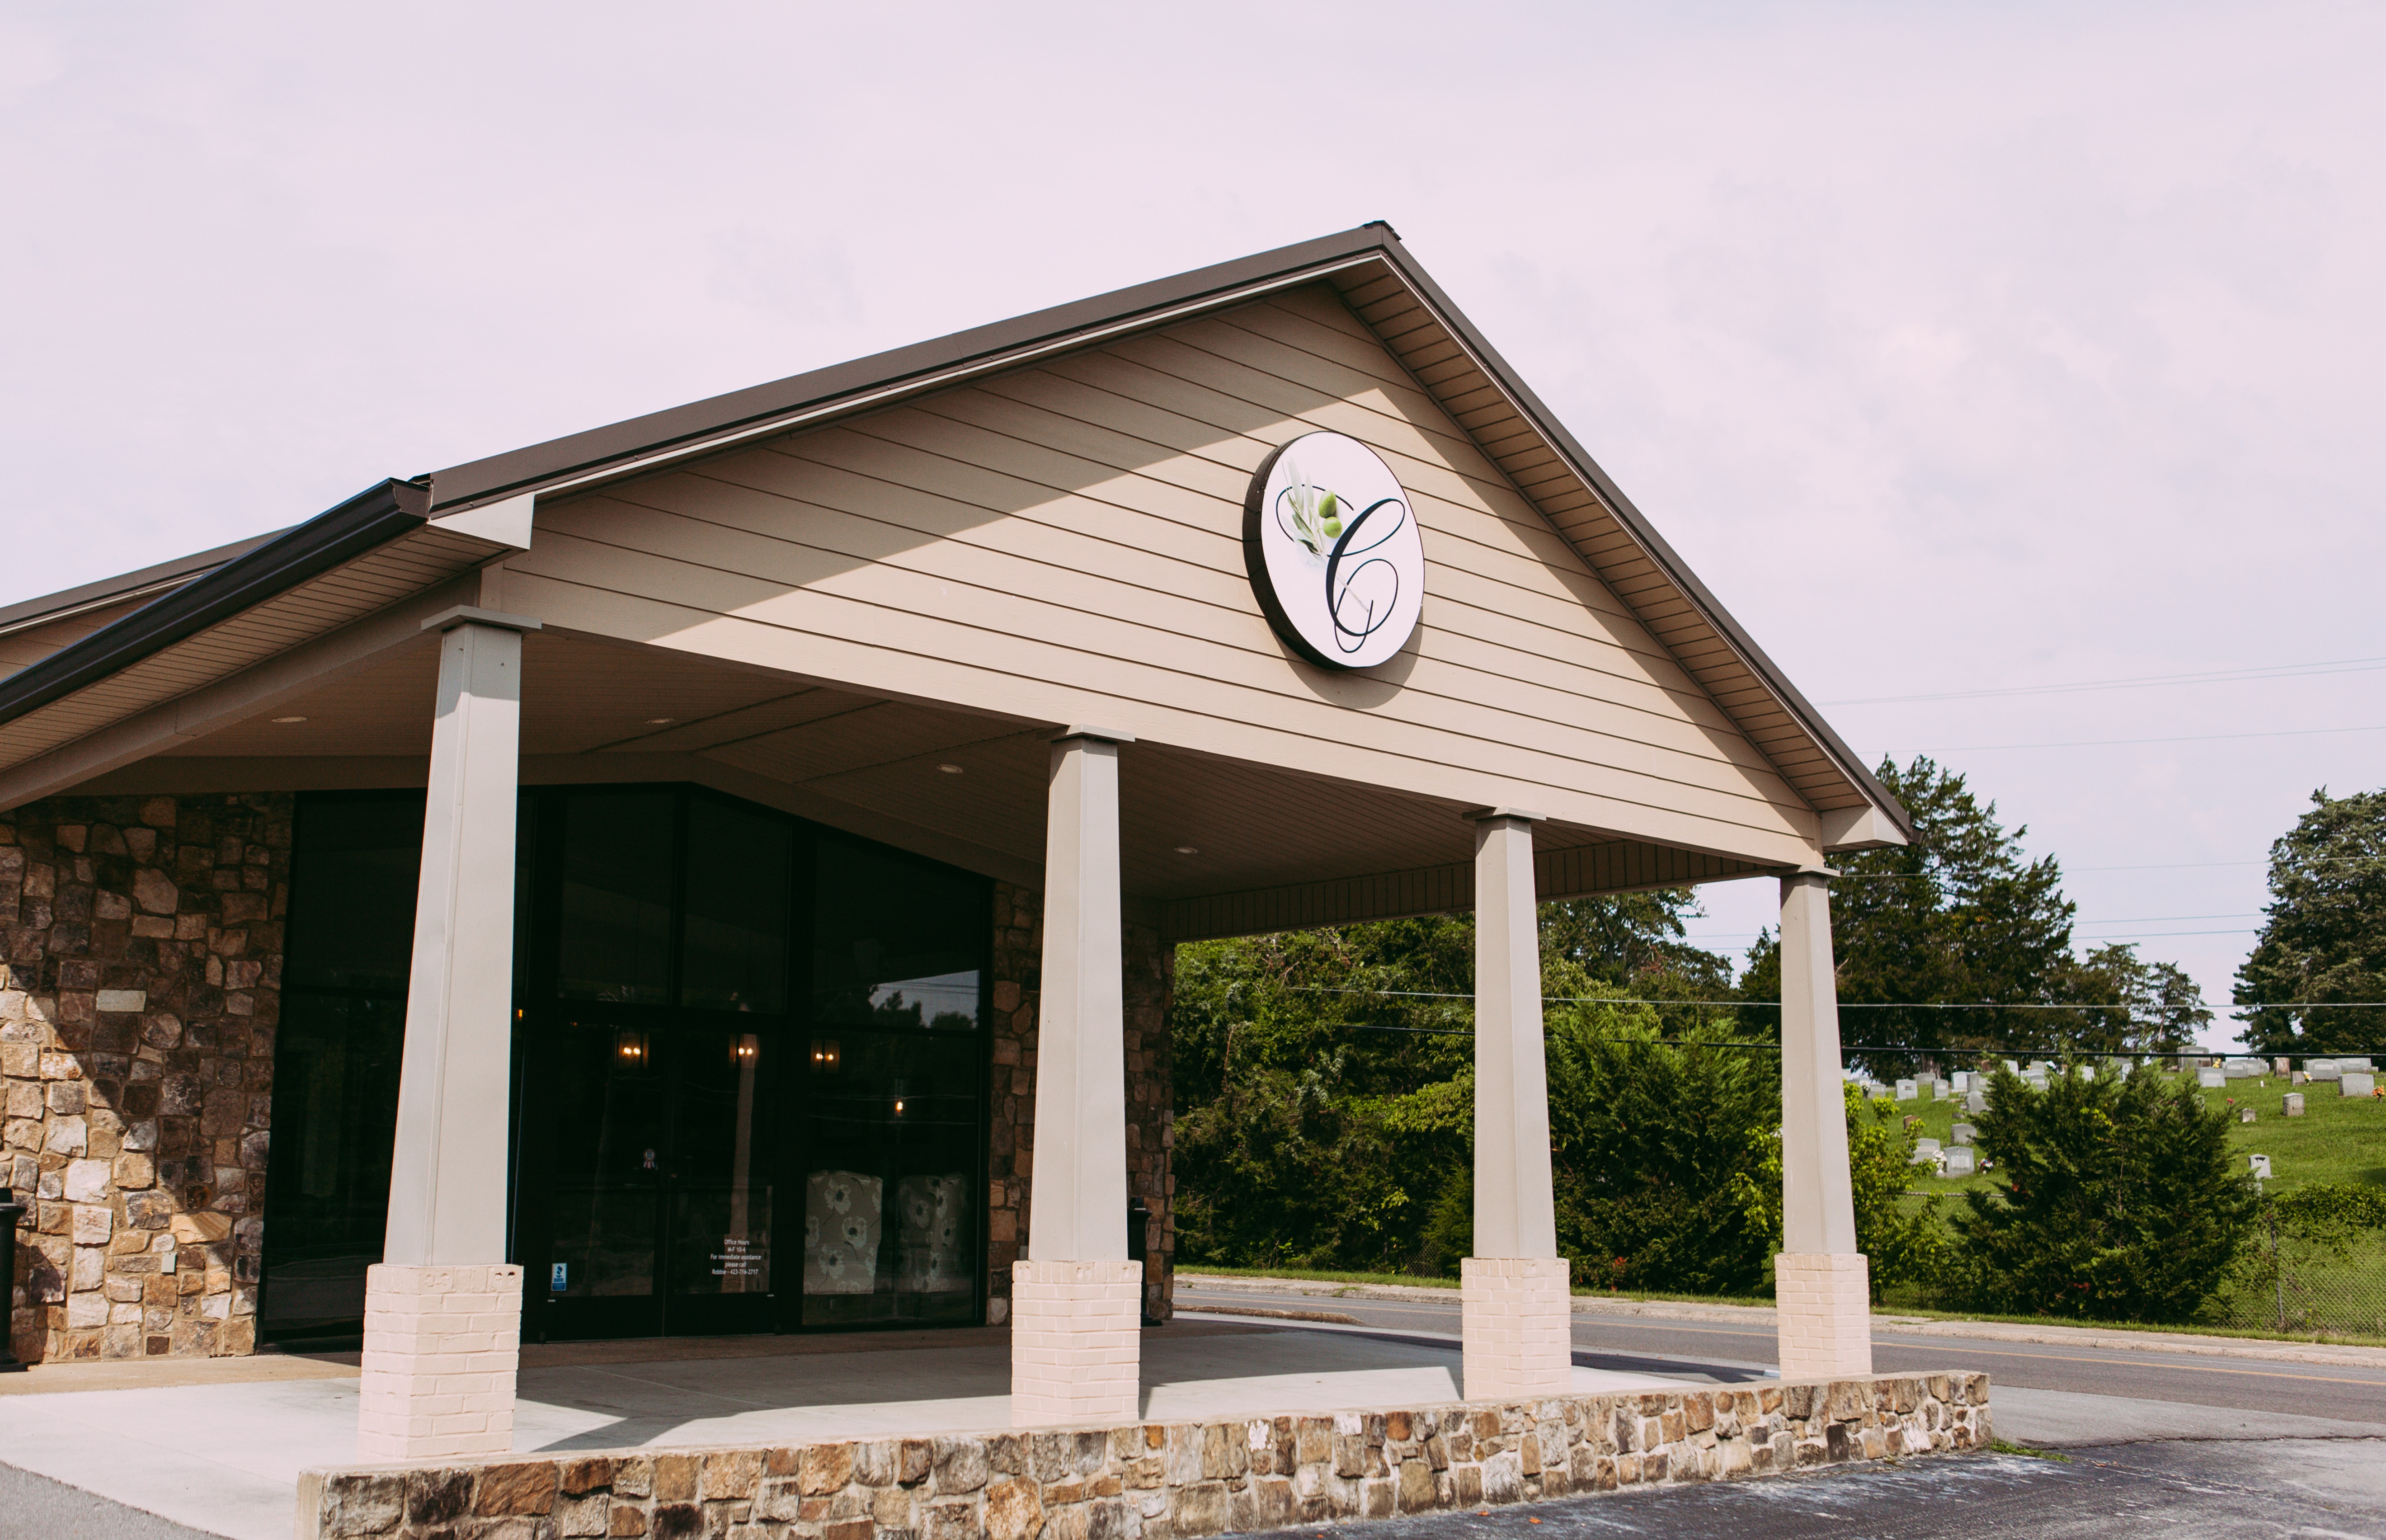 Exterior for Companion Funeral & Cremation Service
400 S White St
Athens, TN 37303